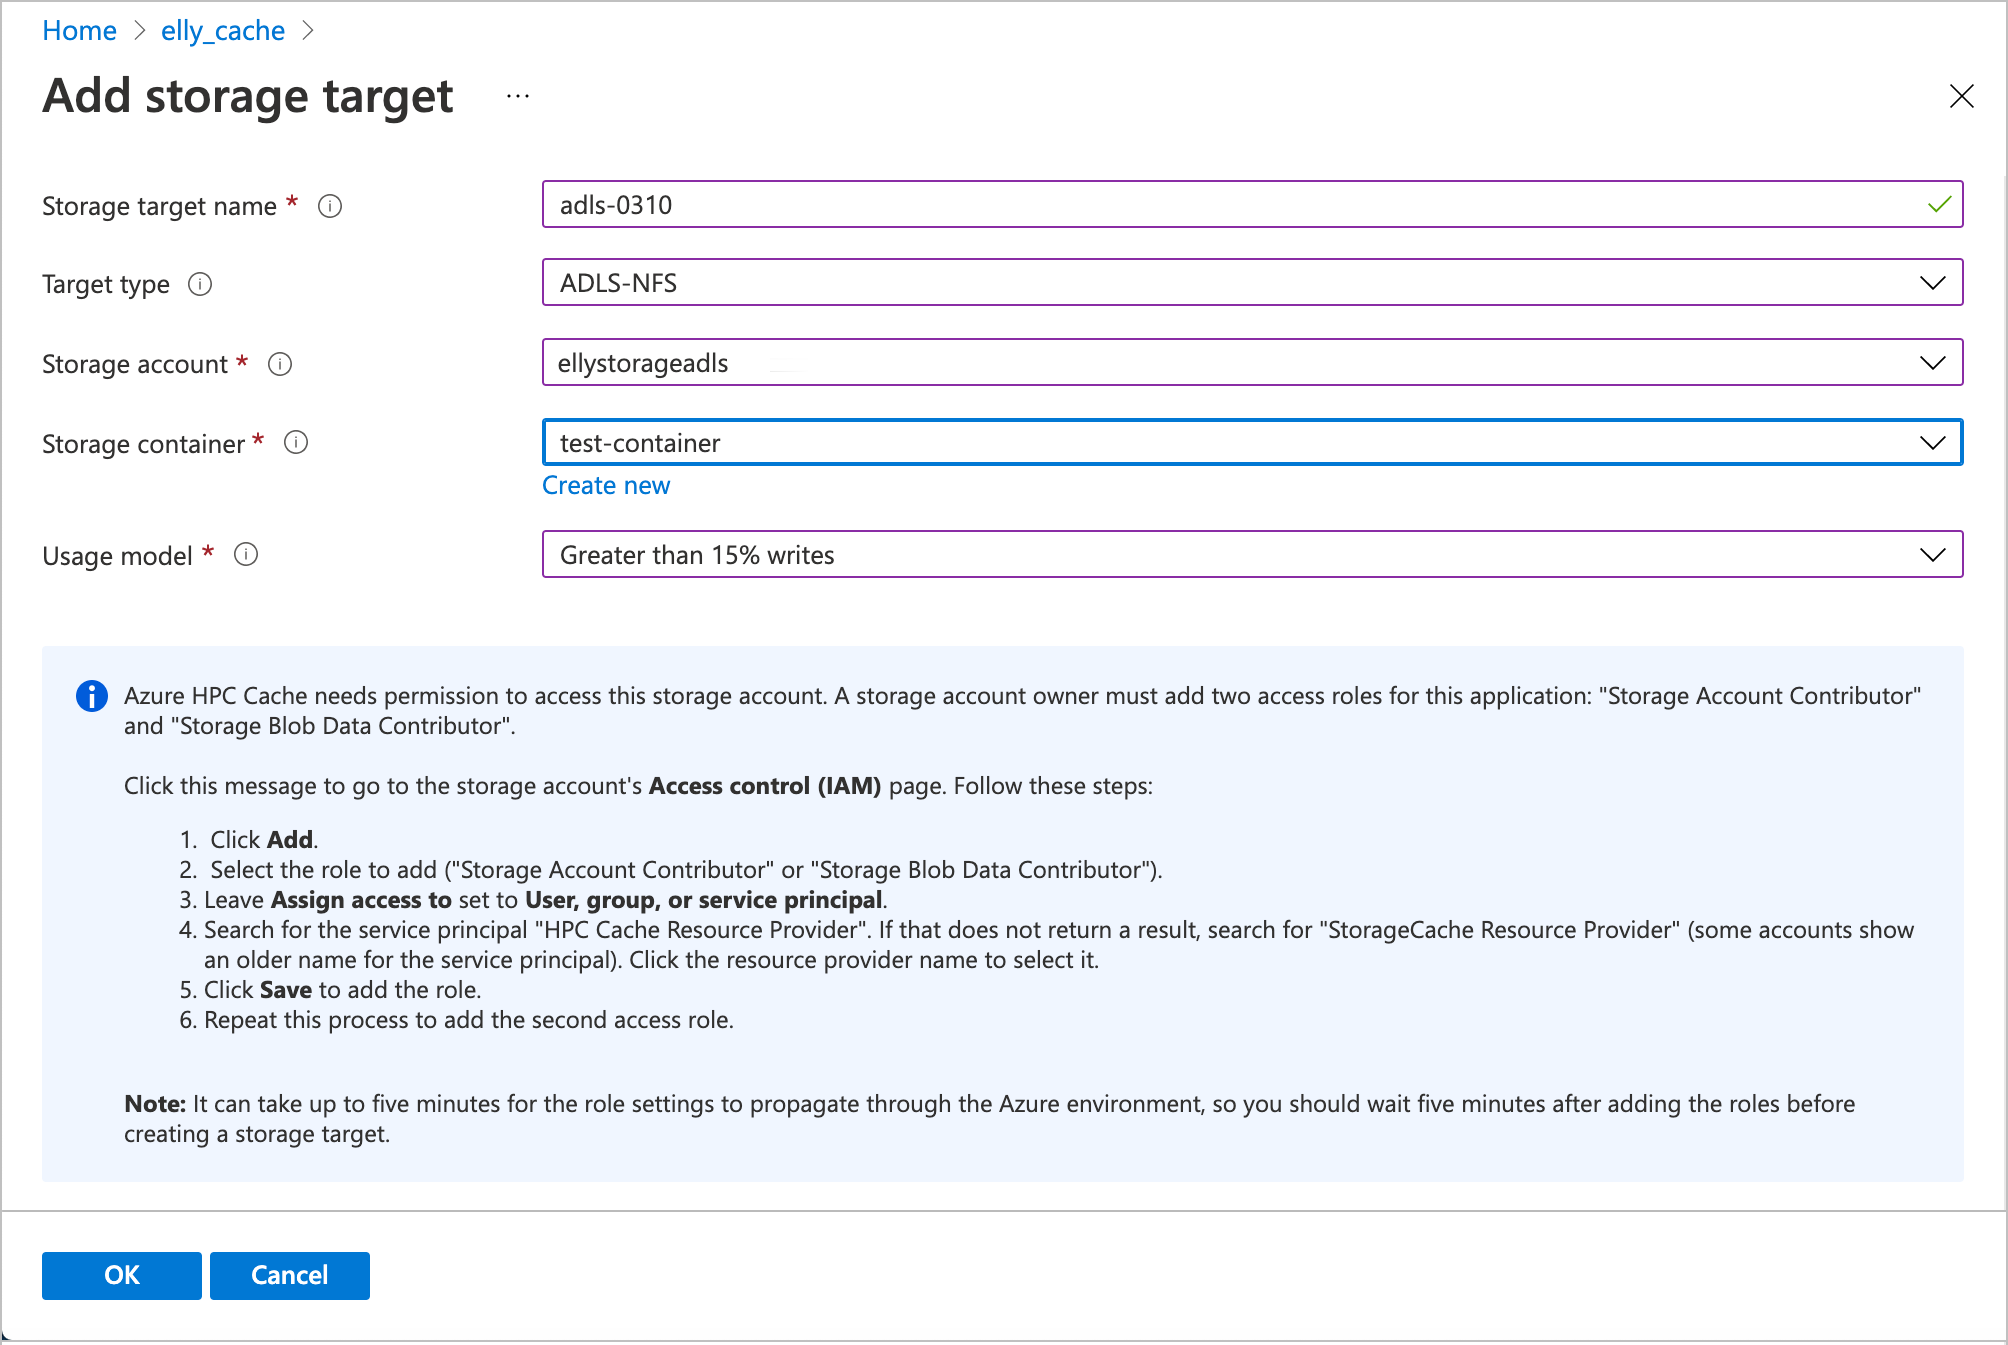 Screenshot of add storage target page with ADLS-NFS target defined